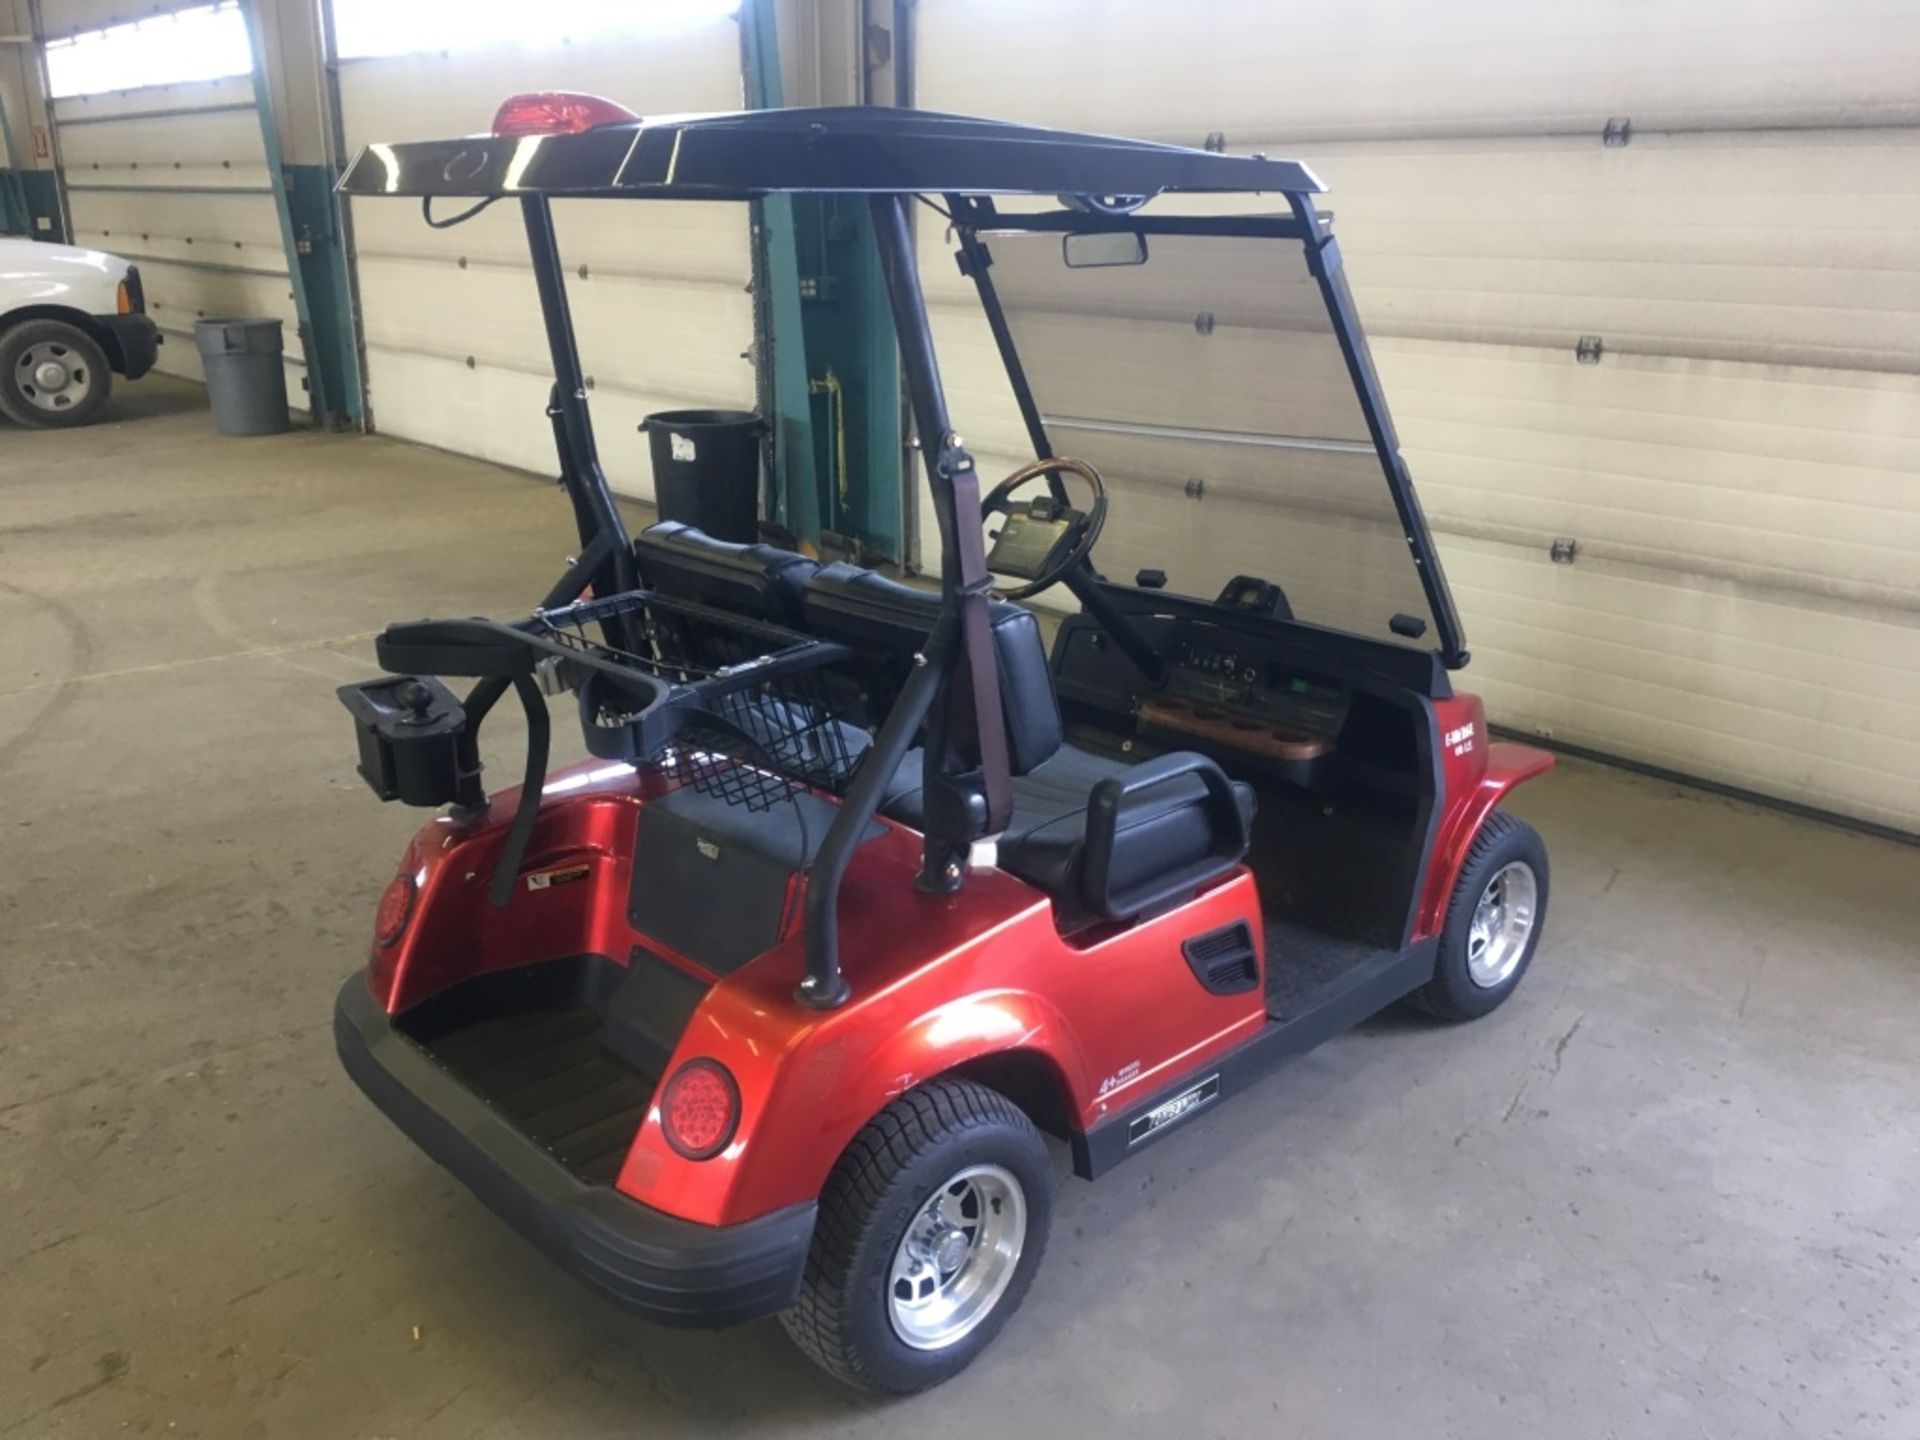 2011 Tomberlin Emerge 500 LE Golf Cart - Image 3 of 14